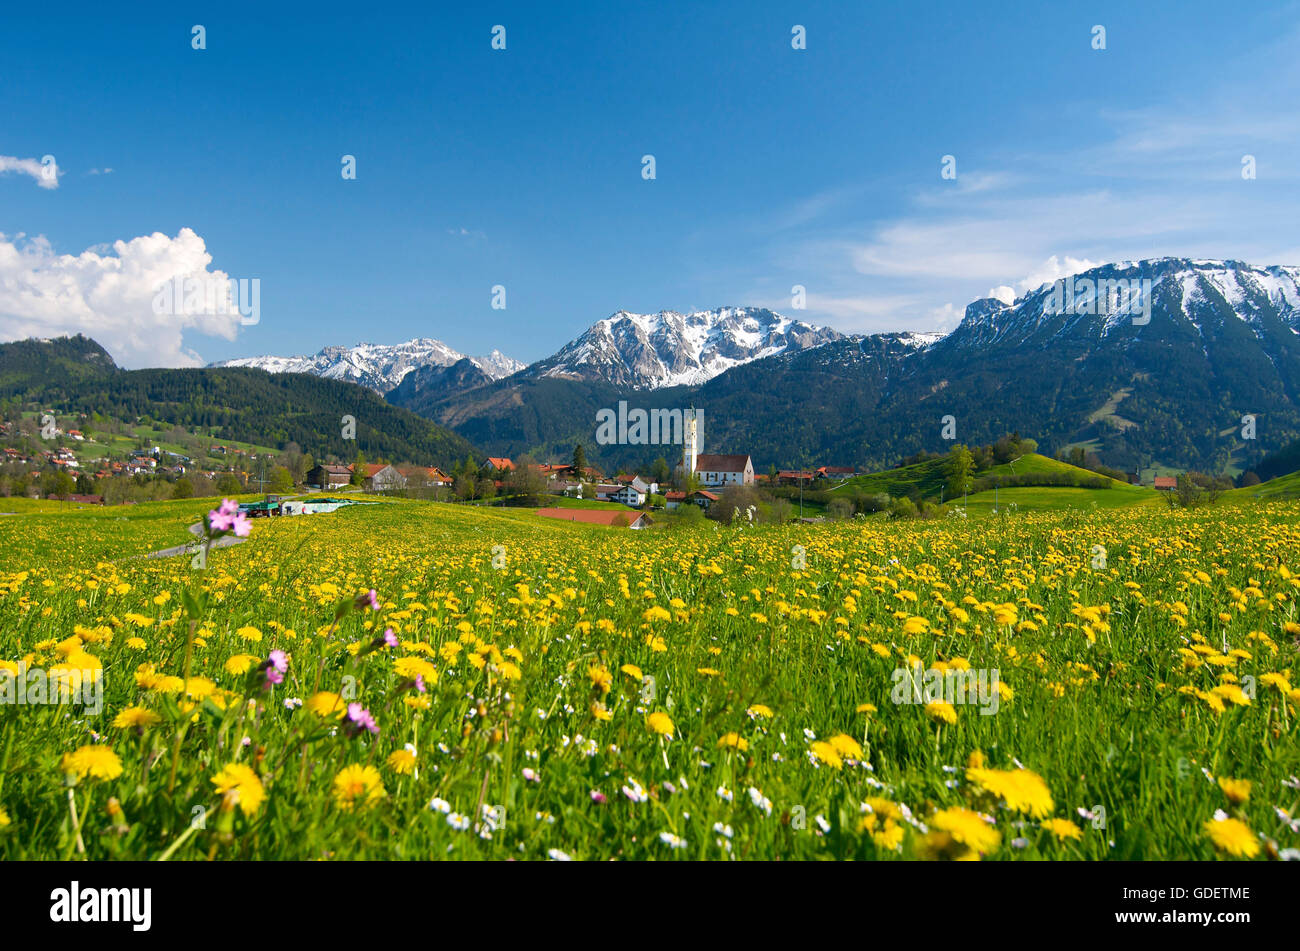 images germany - hi-res Alamy photography stock Pfronten and